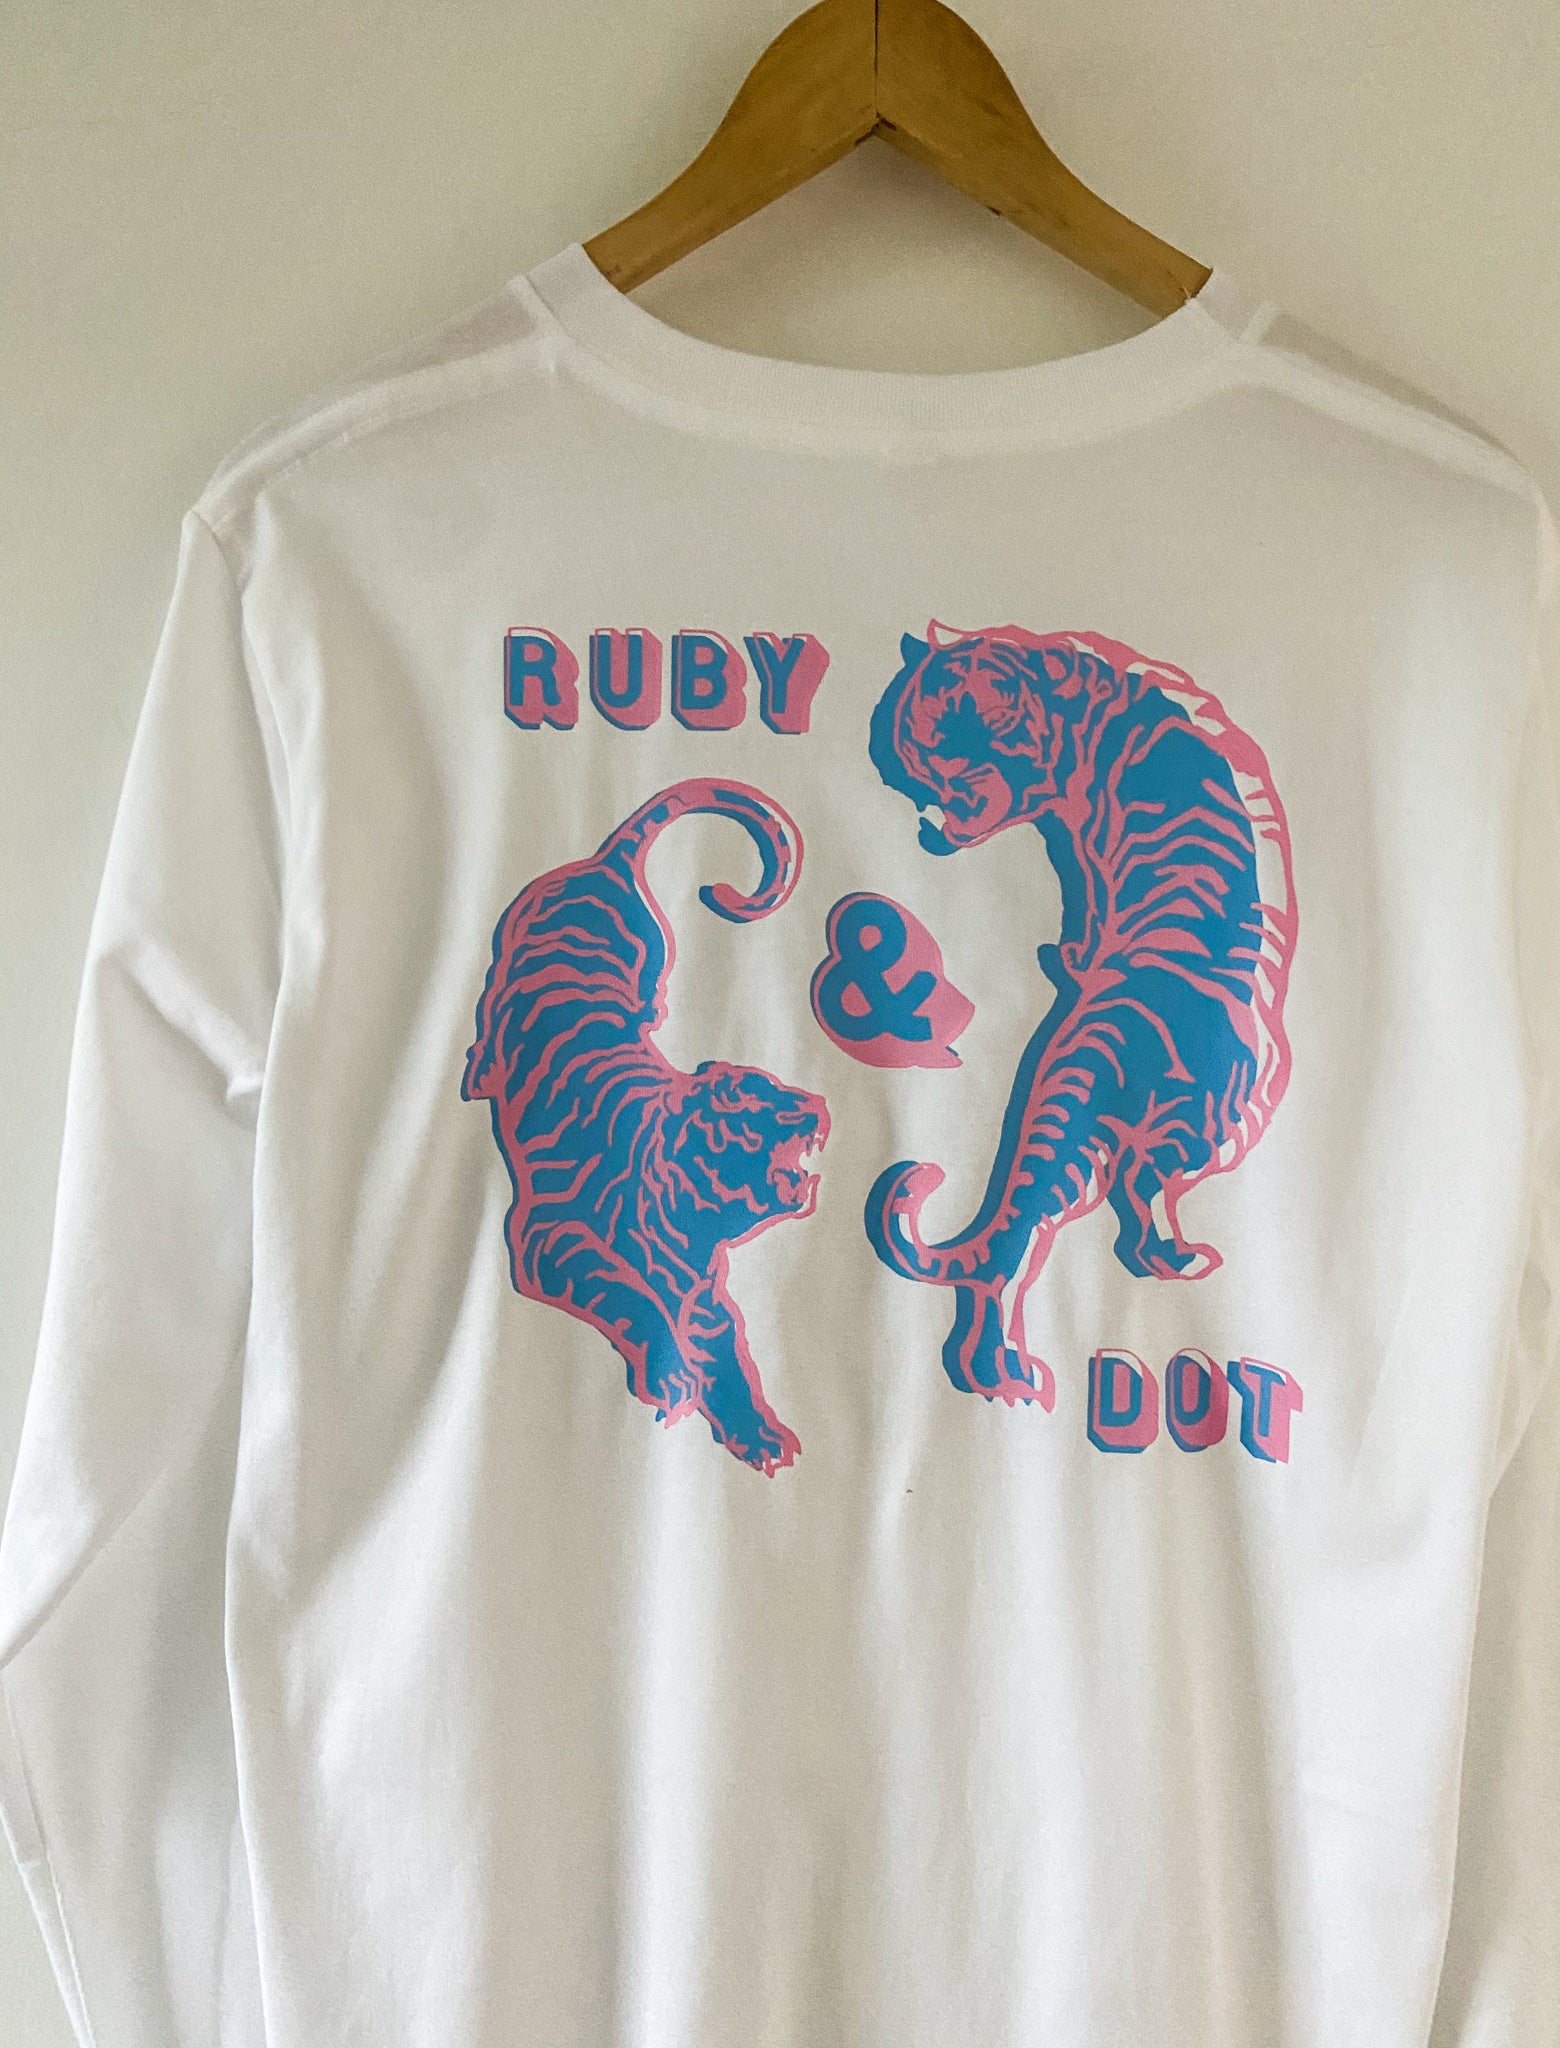 White long Sleeve top with back design of circling pink and blue tigers